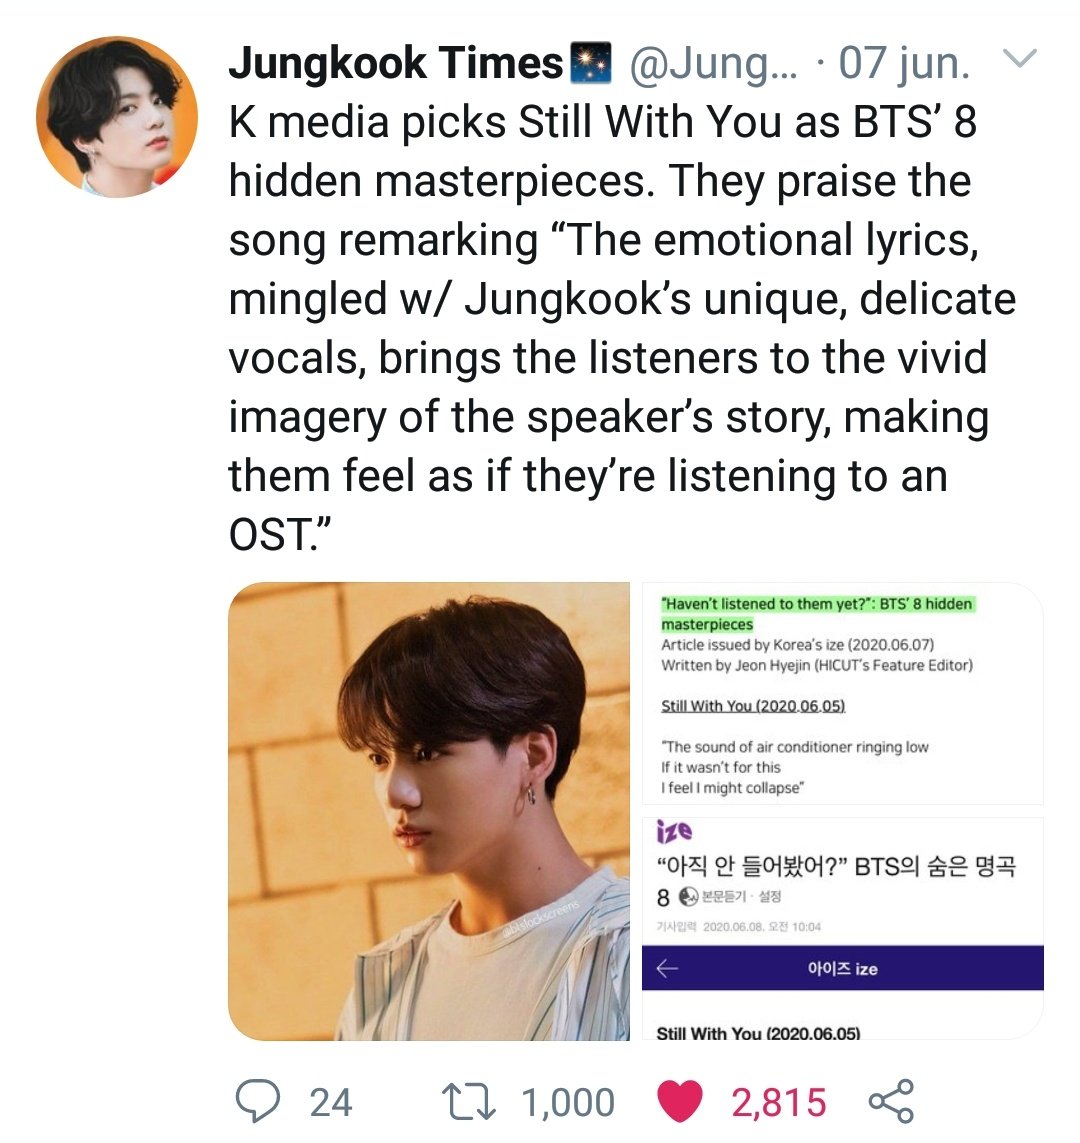 Once again Jungkook's vocals standing out and receiving amazing praise of some professionals like music critics and K-pop colummnists on different BTS' albums and solo songs. This is really not a coicidence!